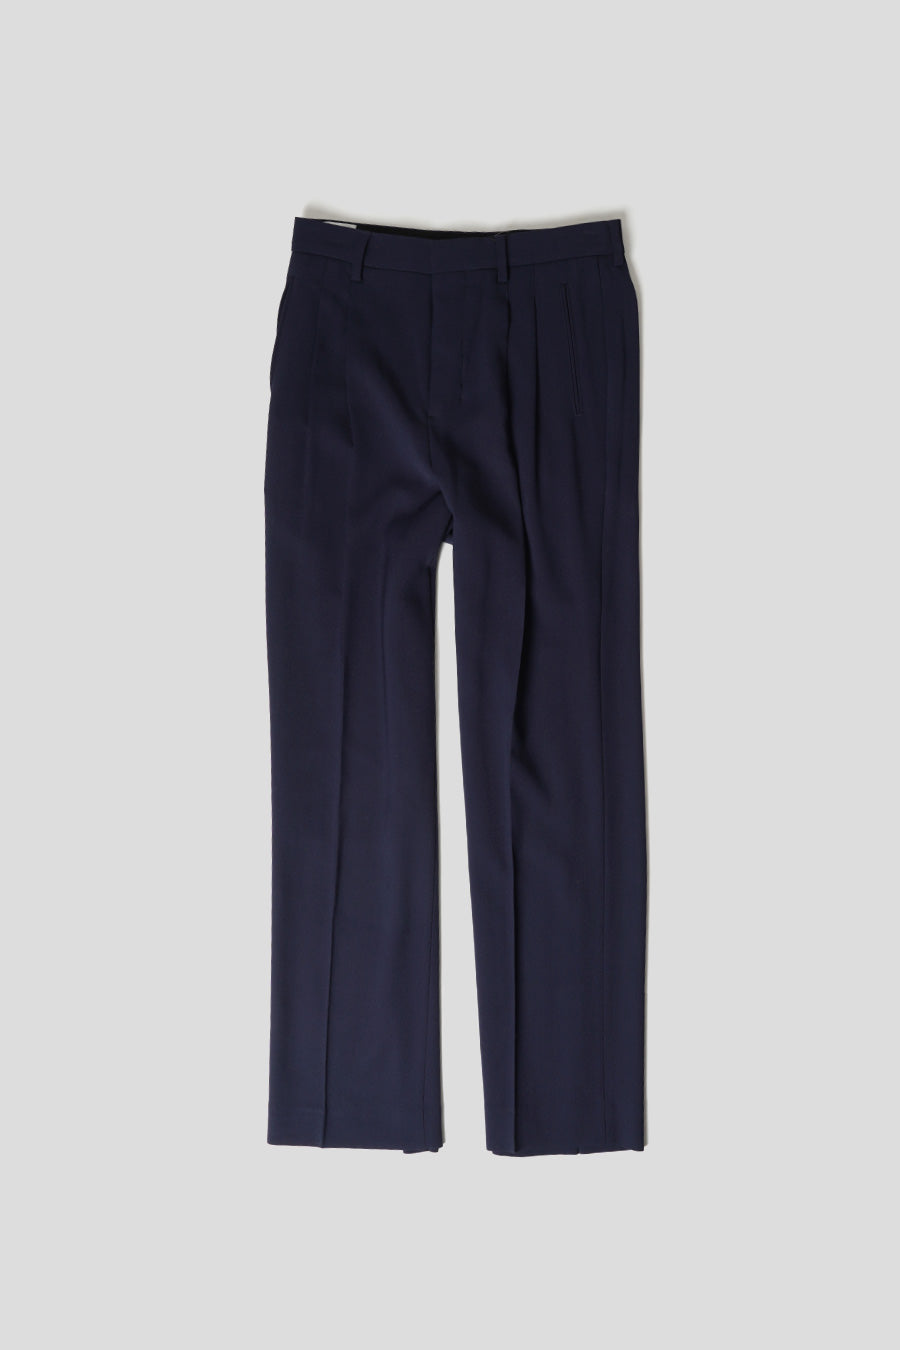 AMI PARIS - MIDNIGHT BLUE STRAIGHT FIT TROUSERS - LE LABO STORE